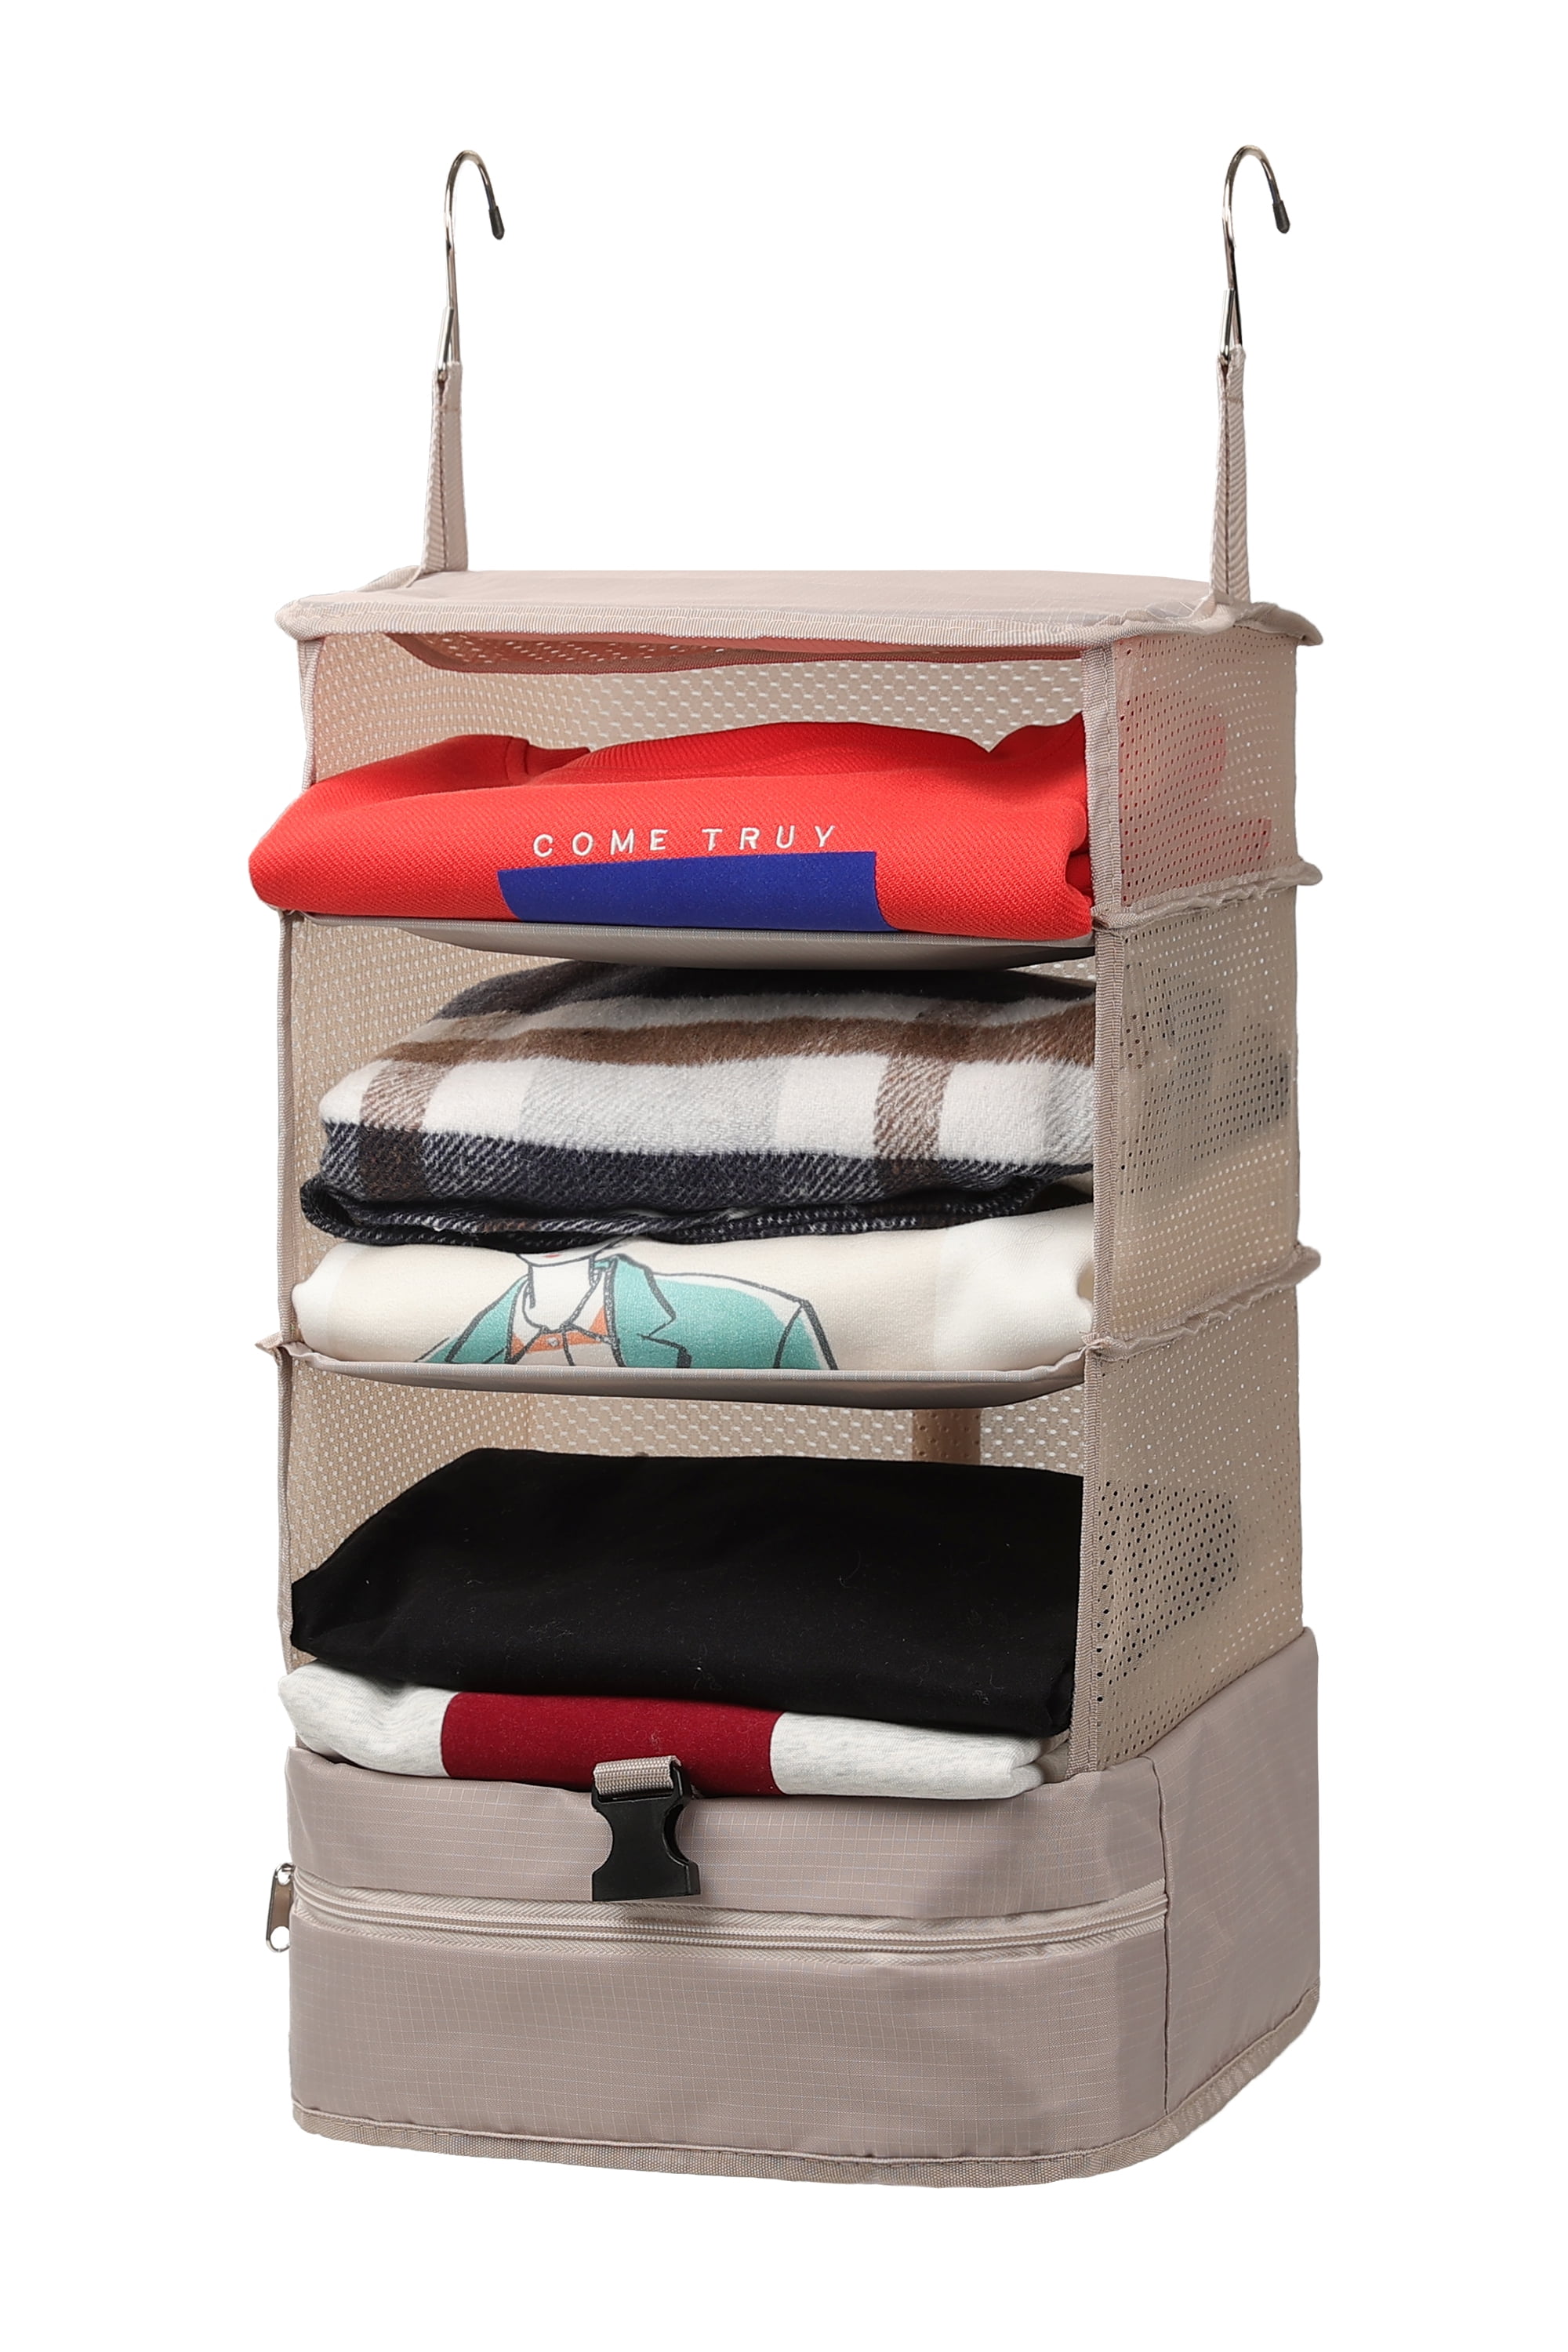 Pack Gear Hanging Suitcase Organizer, Travel Essential Foldable Packing  Cubes, Pack Large or Carry On Luggage, Shelf Organizer for Closet (Solid